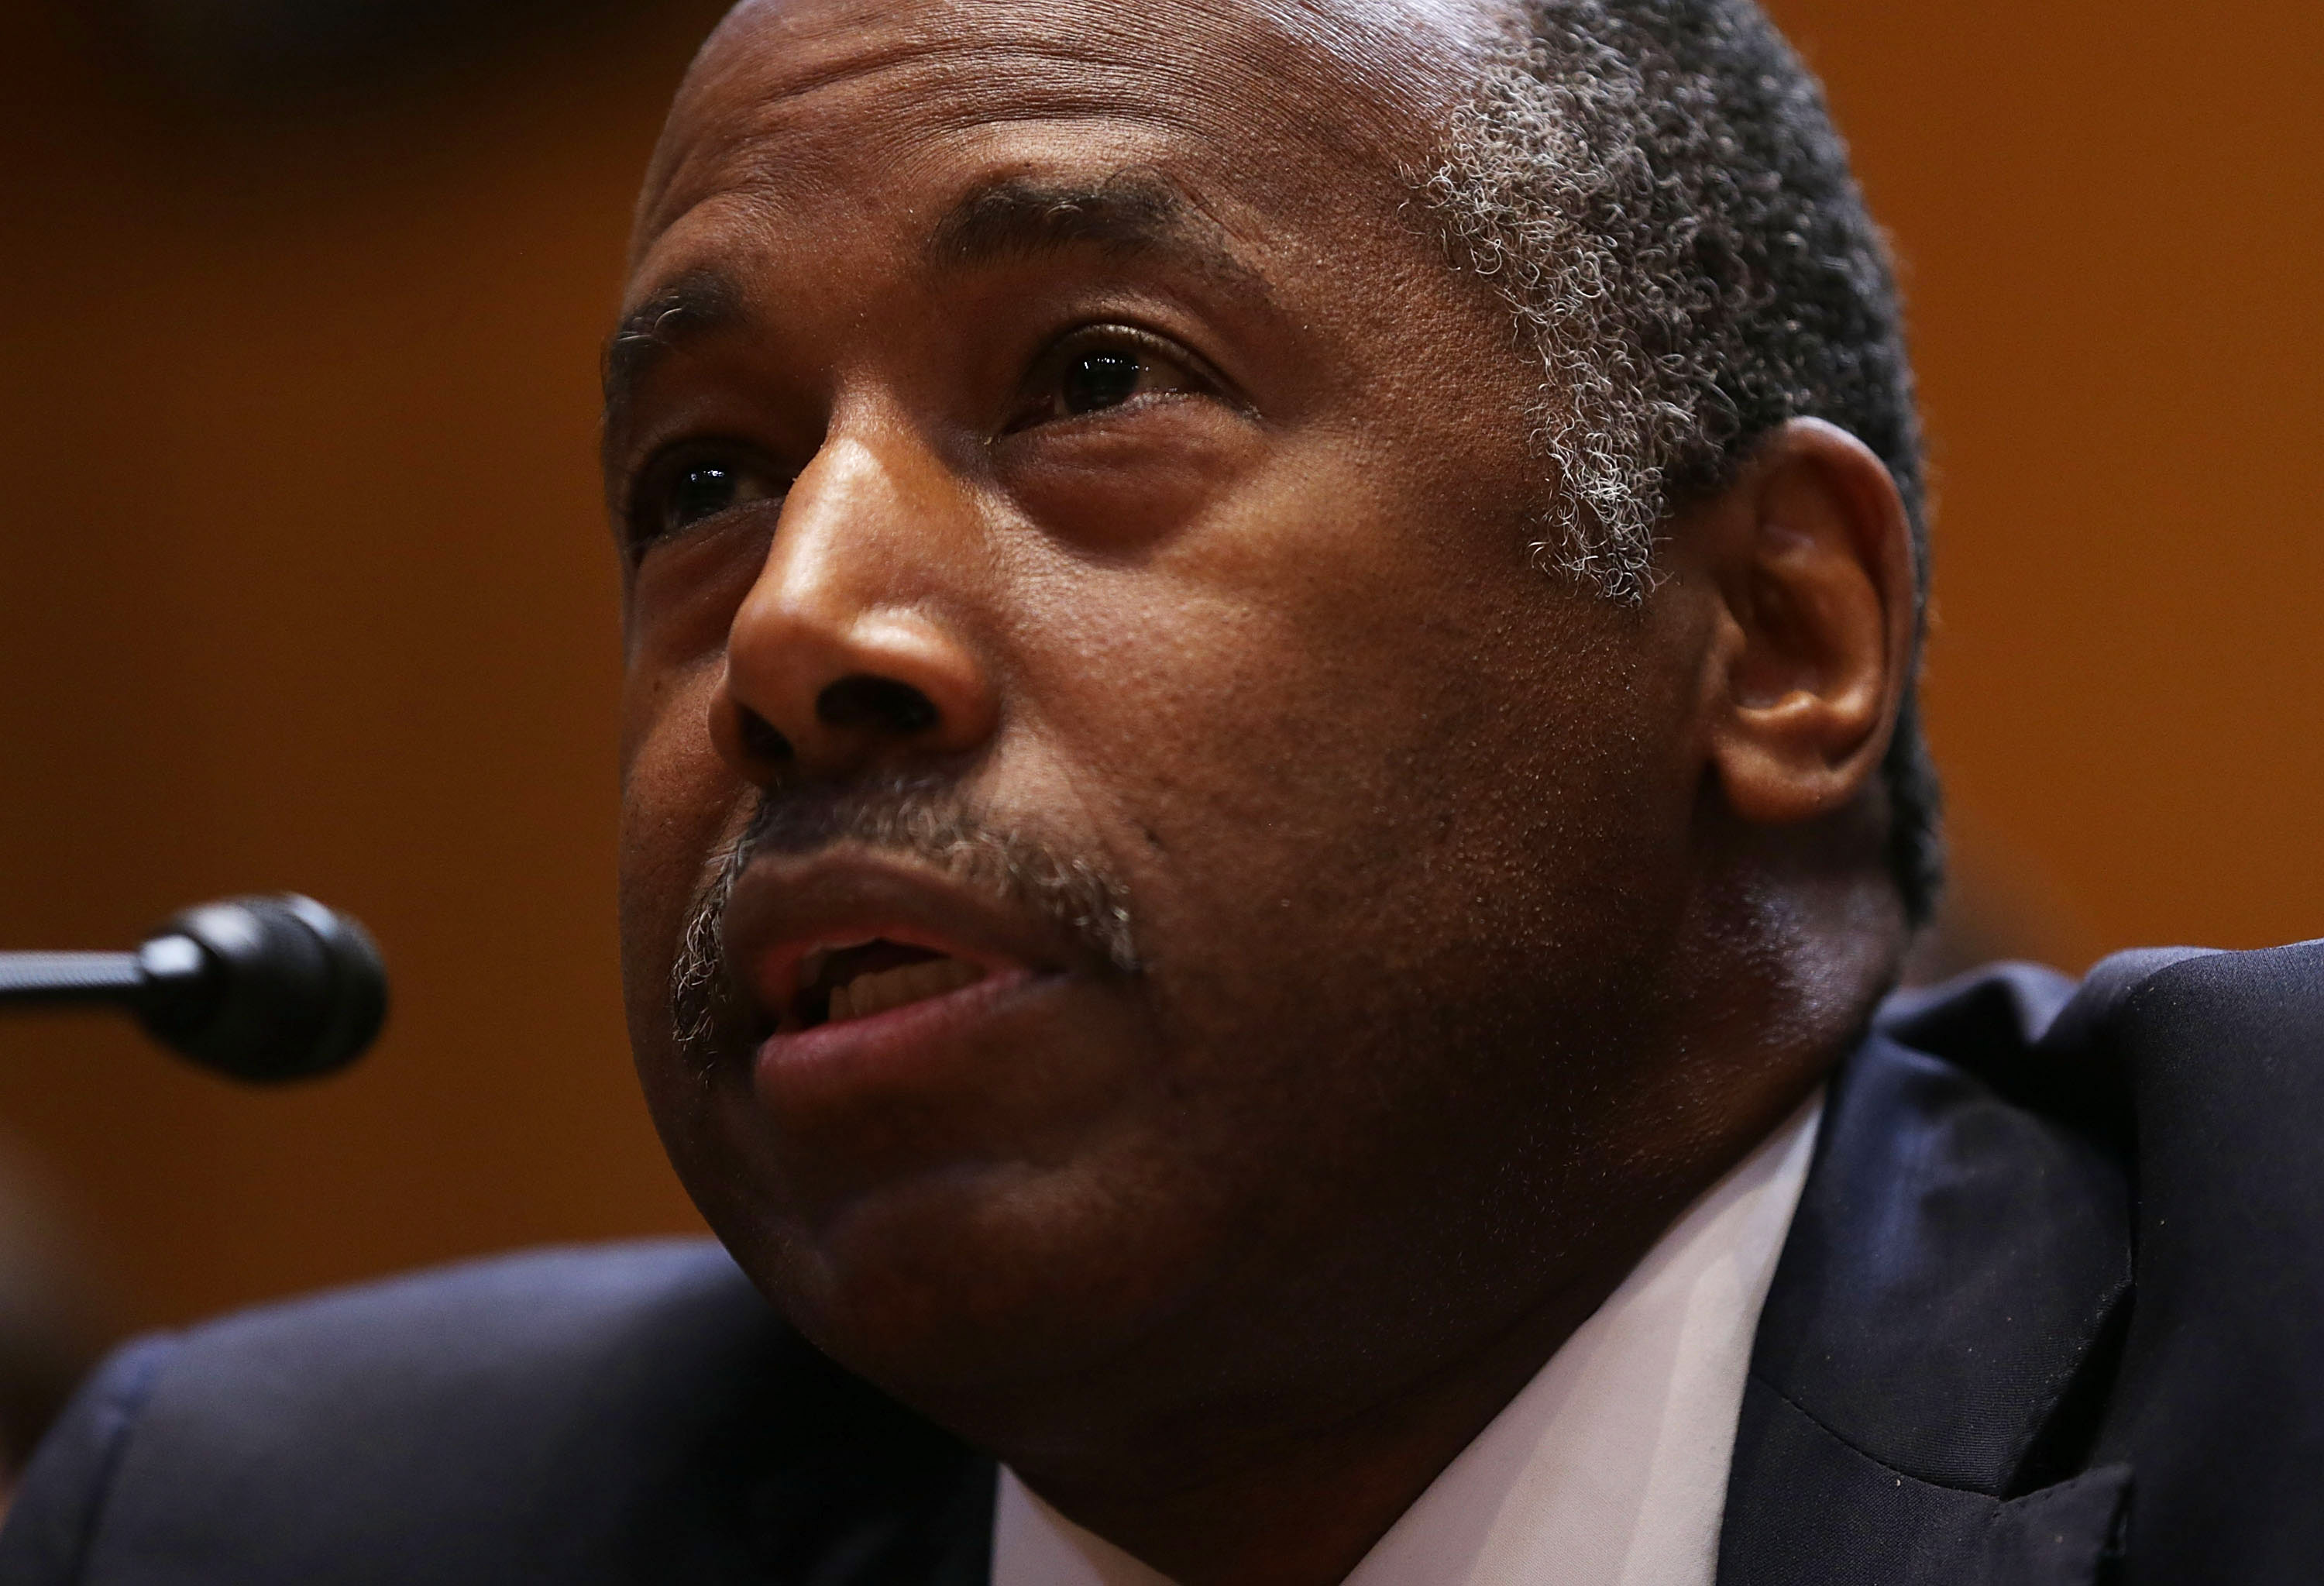 Housing and Urban Development Secretary Ben Carson testifies during a hearing before the Transportation, Housing and Urban Development, and Related Agencies Subcommittee of the Senate Appropriations Committee June 7, 2017 on Capitol Hill in Washington, DC. (Alex Wong&mdash;Getty Images)